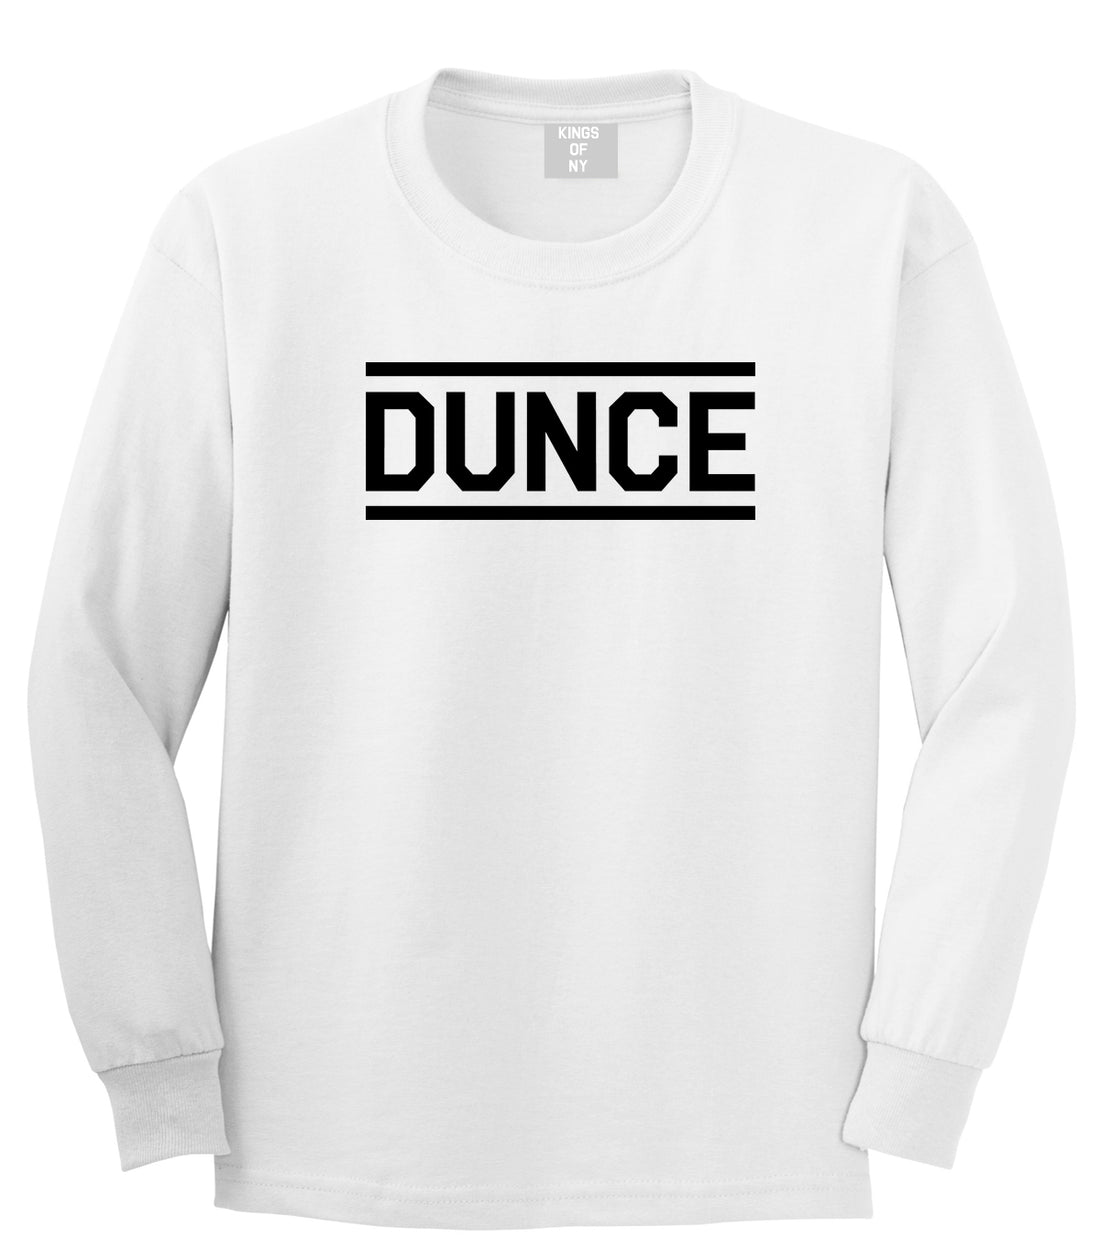 Dunce Funny Mens White Long Sleeve T-Shirt by Kings Of NY